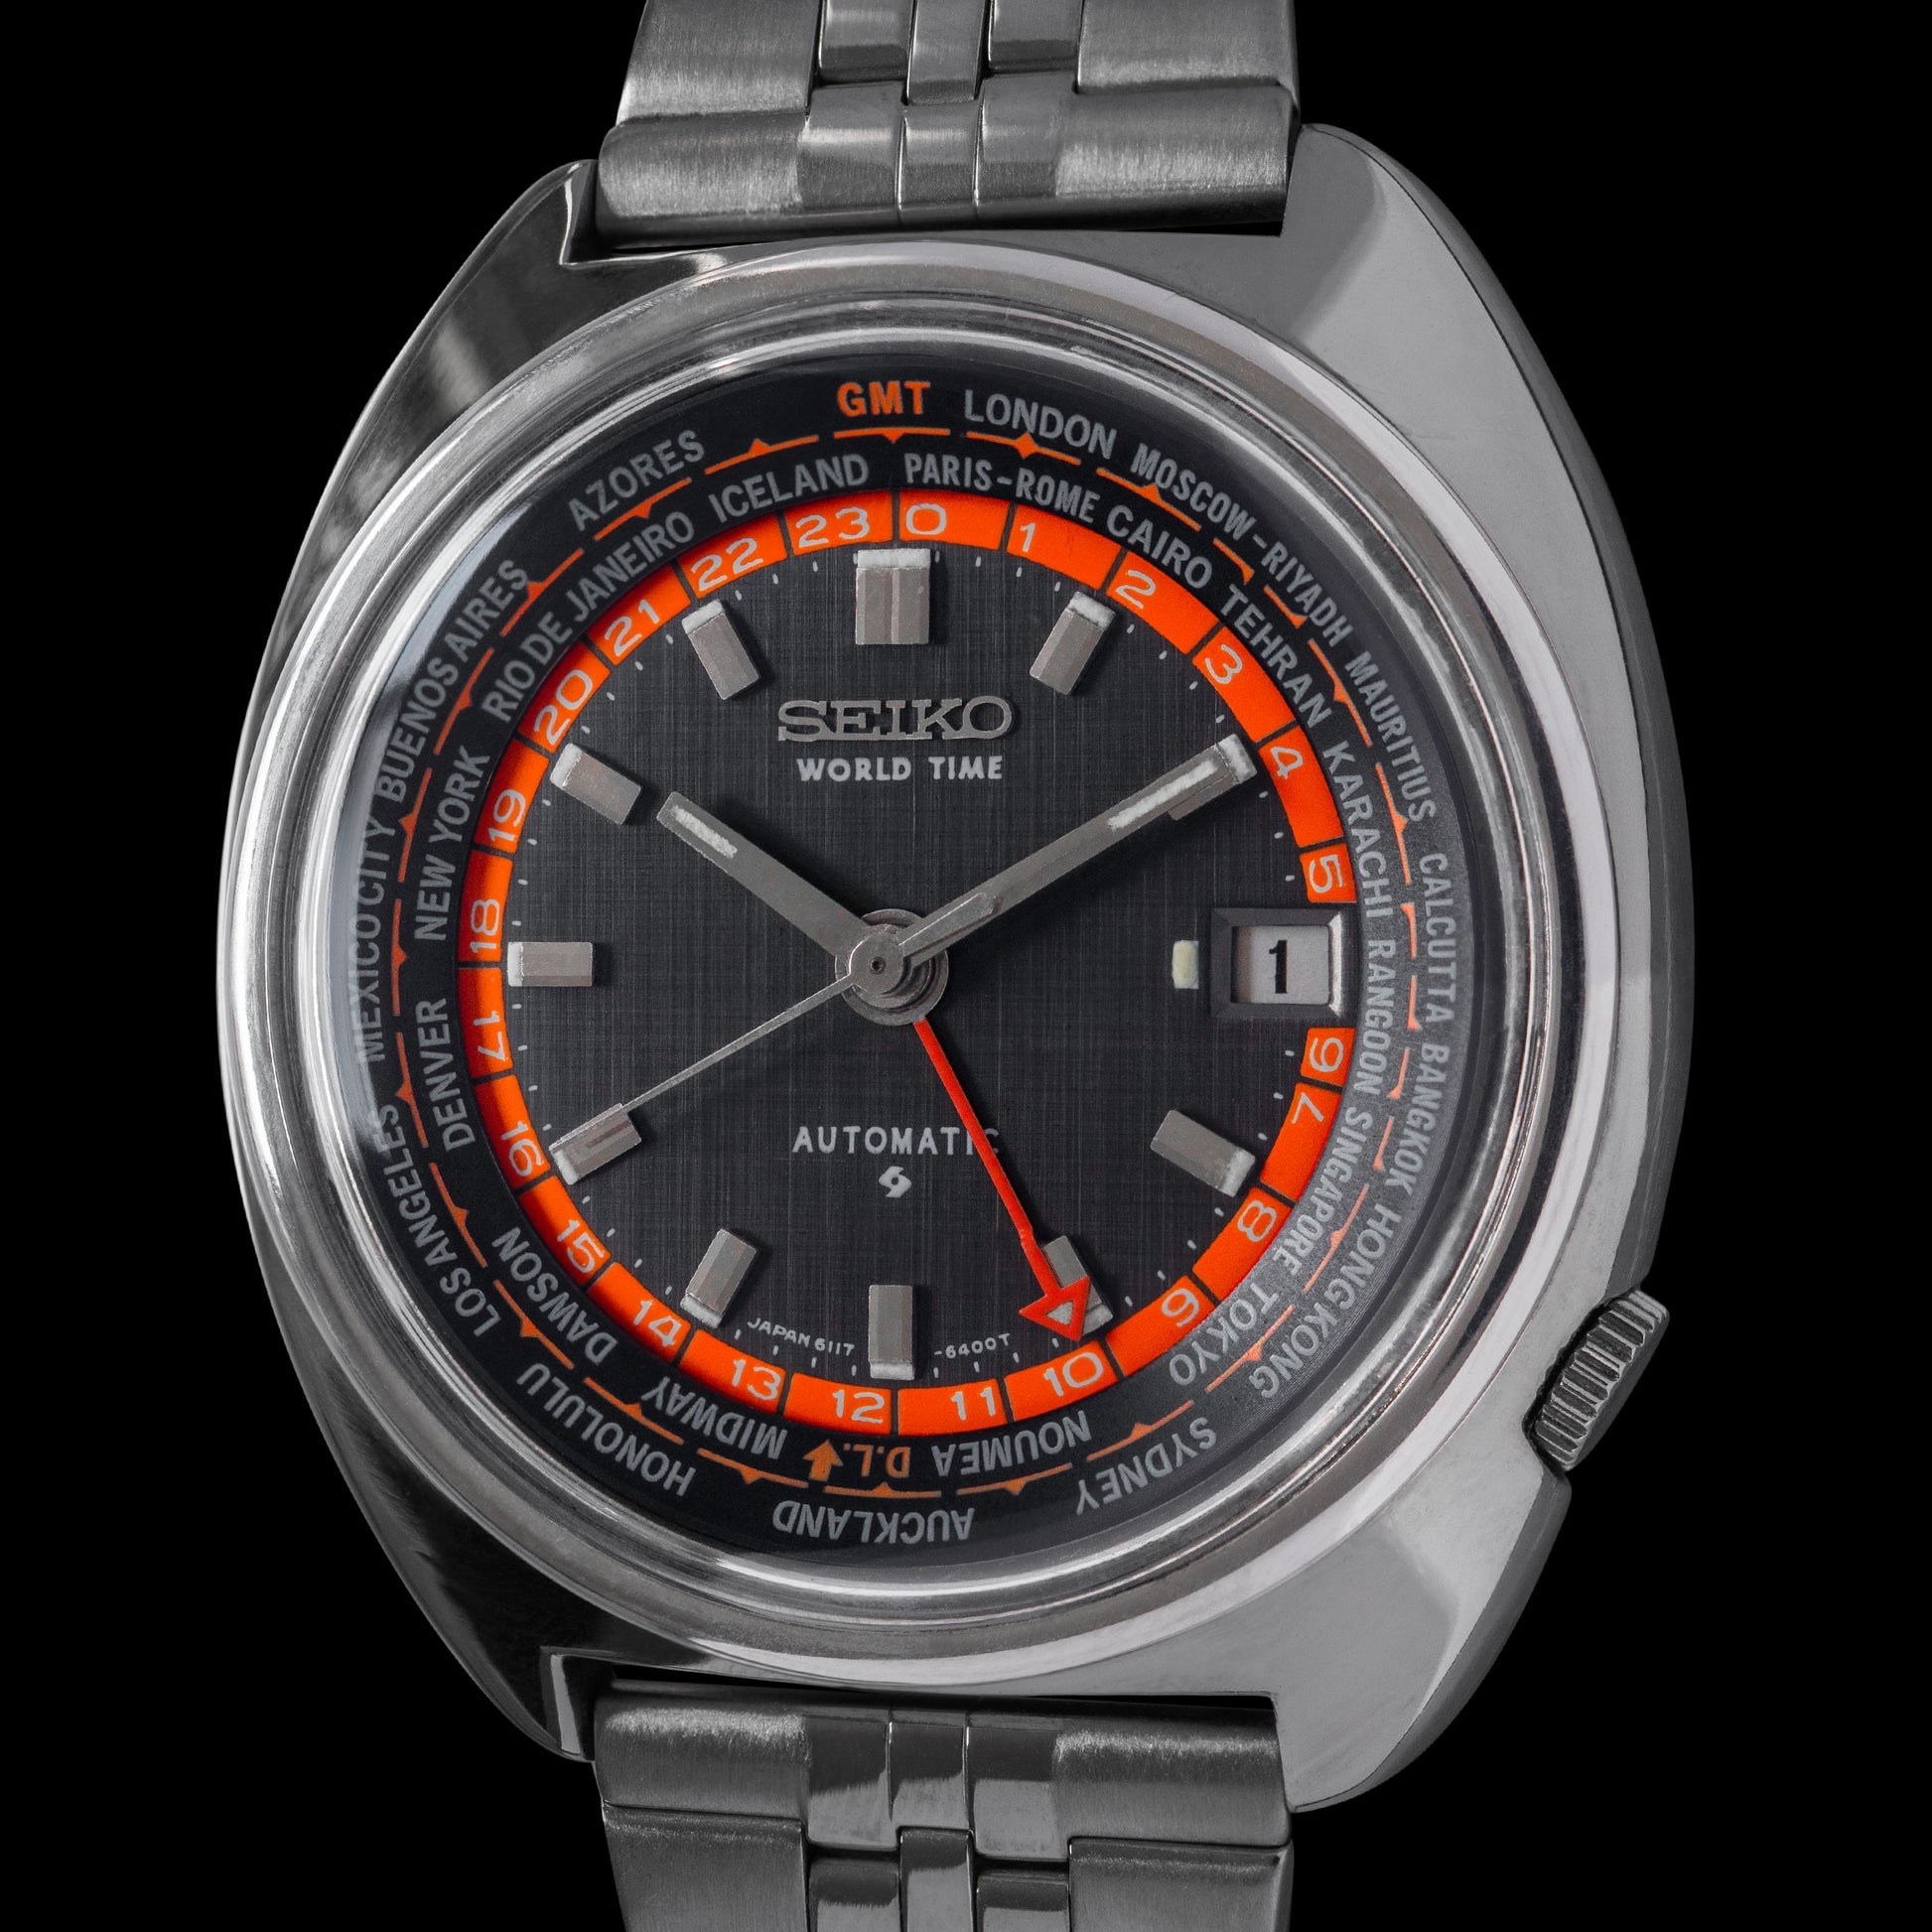 No. 483 / Seiko World Time (3rd model) - 1972 – From Time To Times